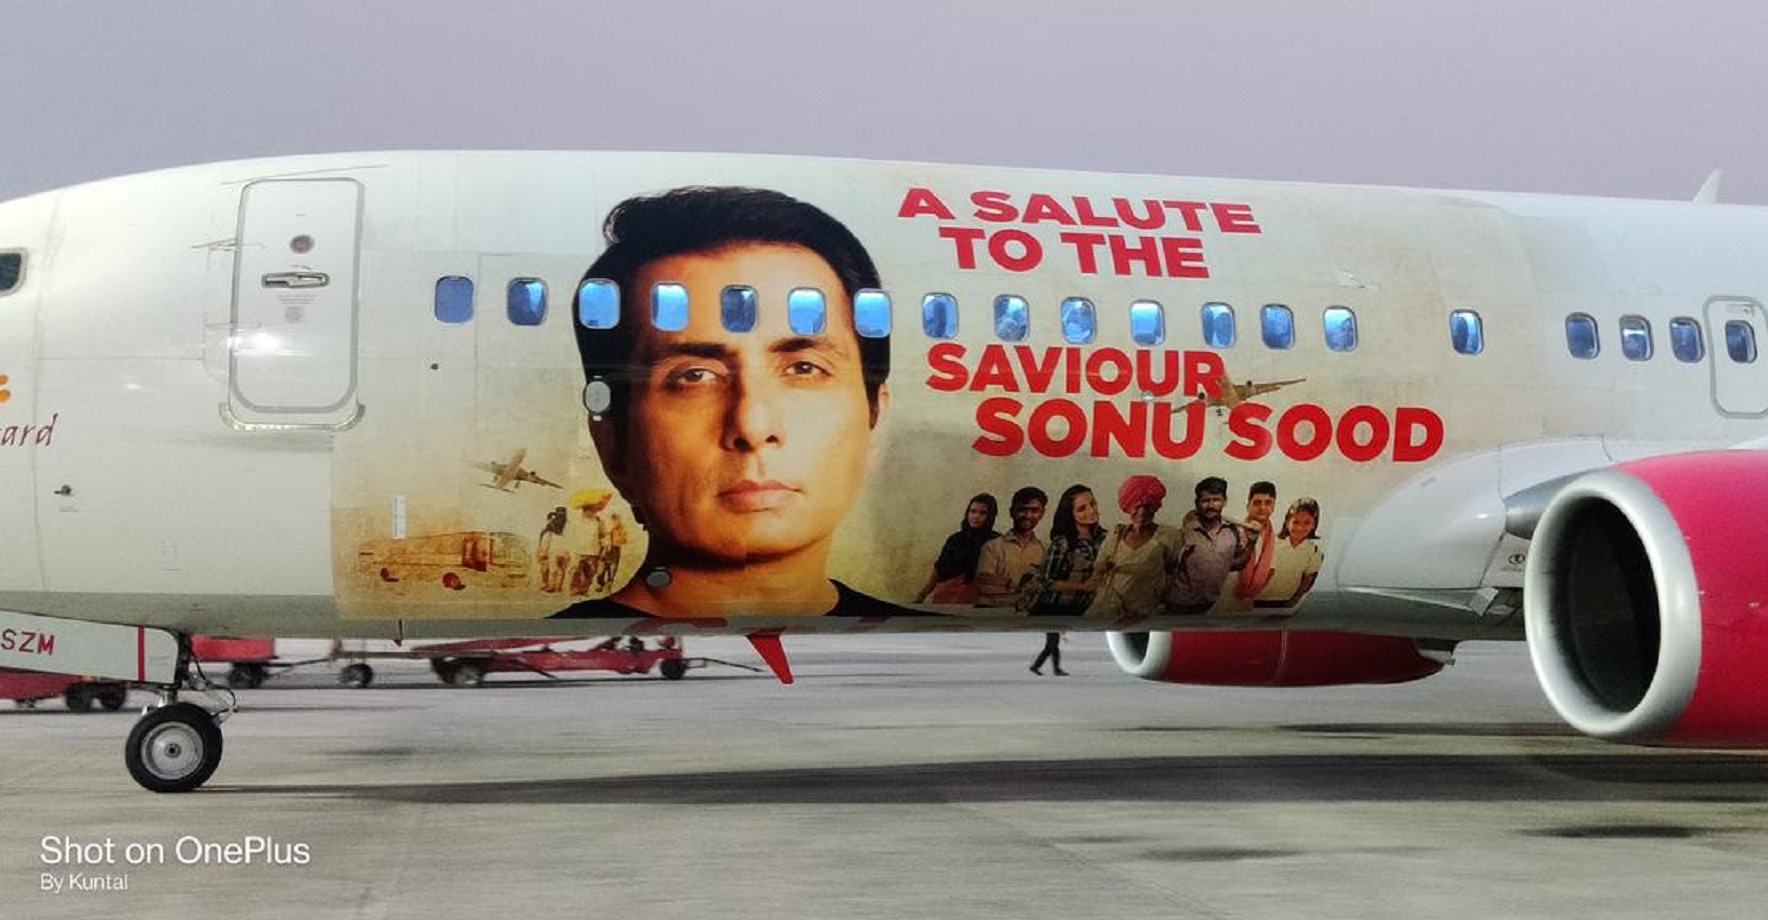 Sonu Sood Remembers How He Came To Mumbai With an ‘Unreserved Ticket’, After Spice Jet Honours Him With His Face On Their Plane